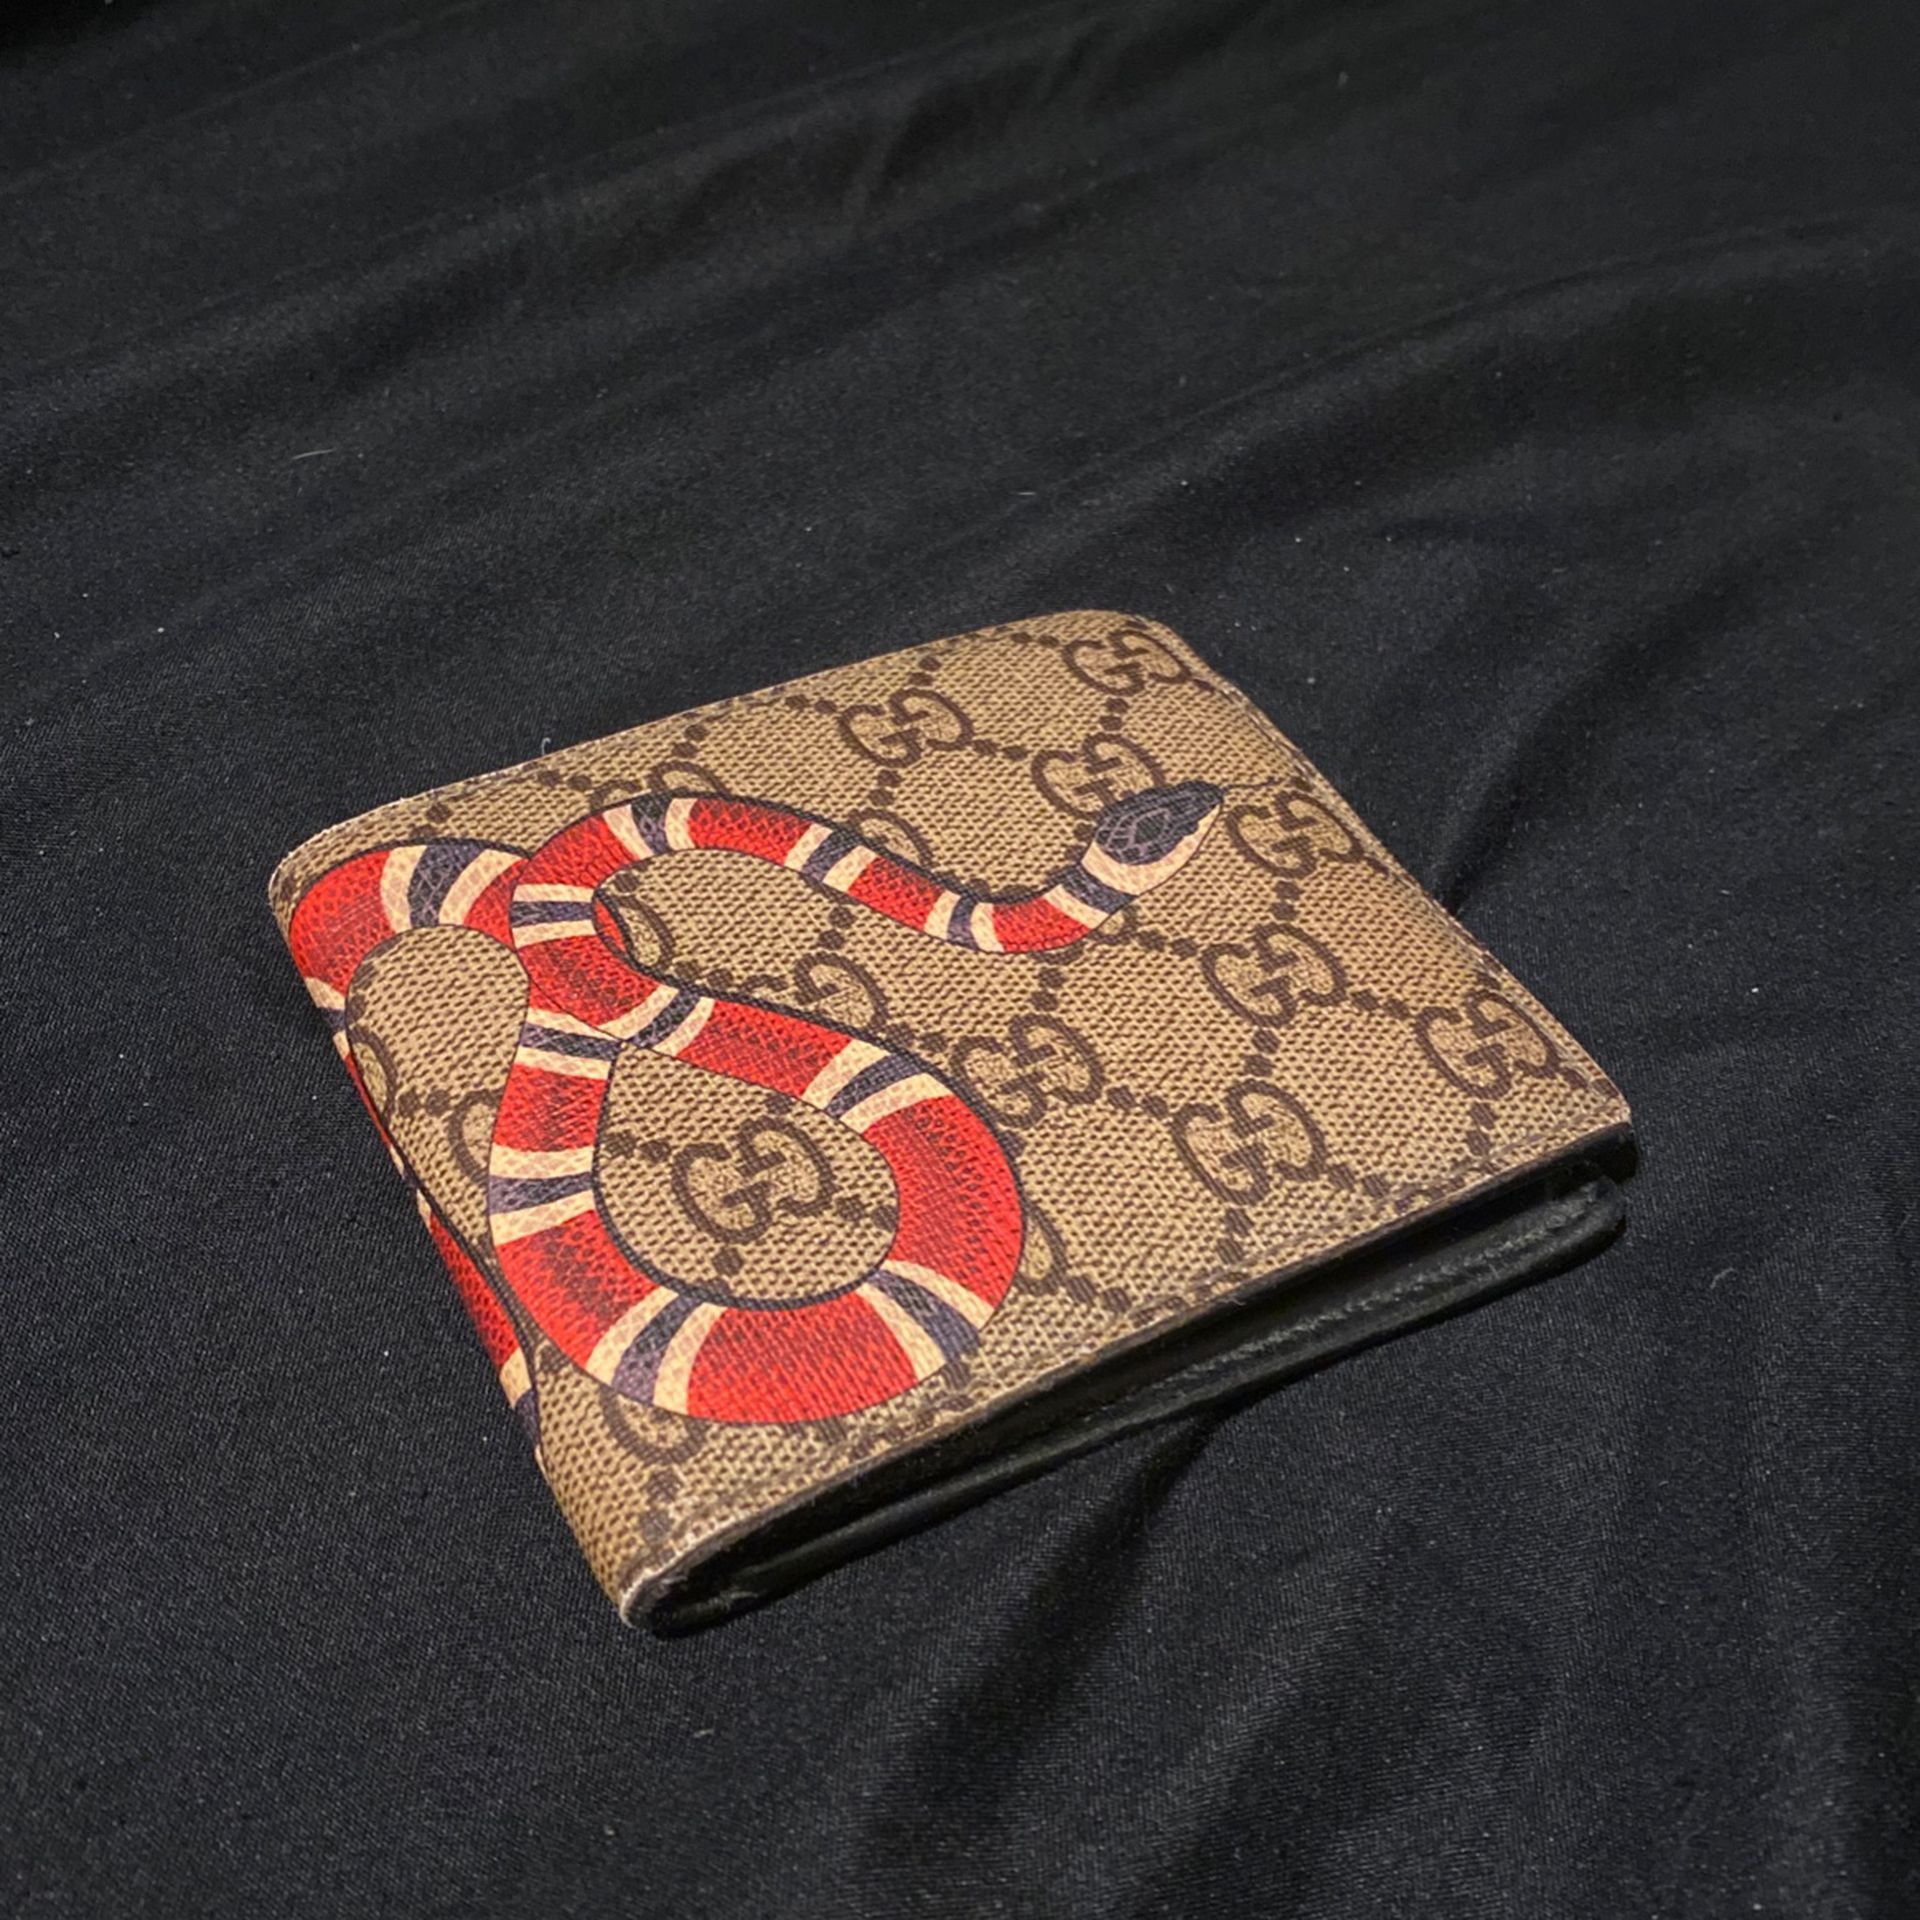 Authentic Gucci Snake Wallet